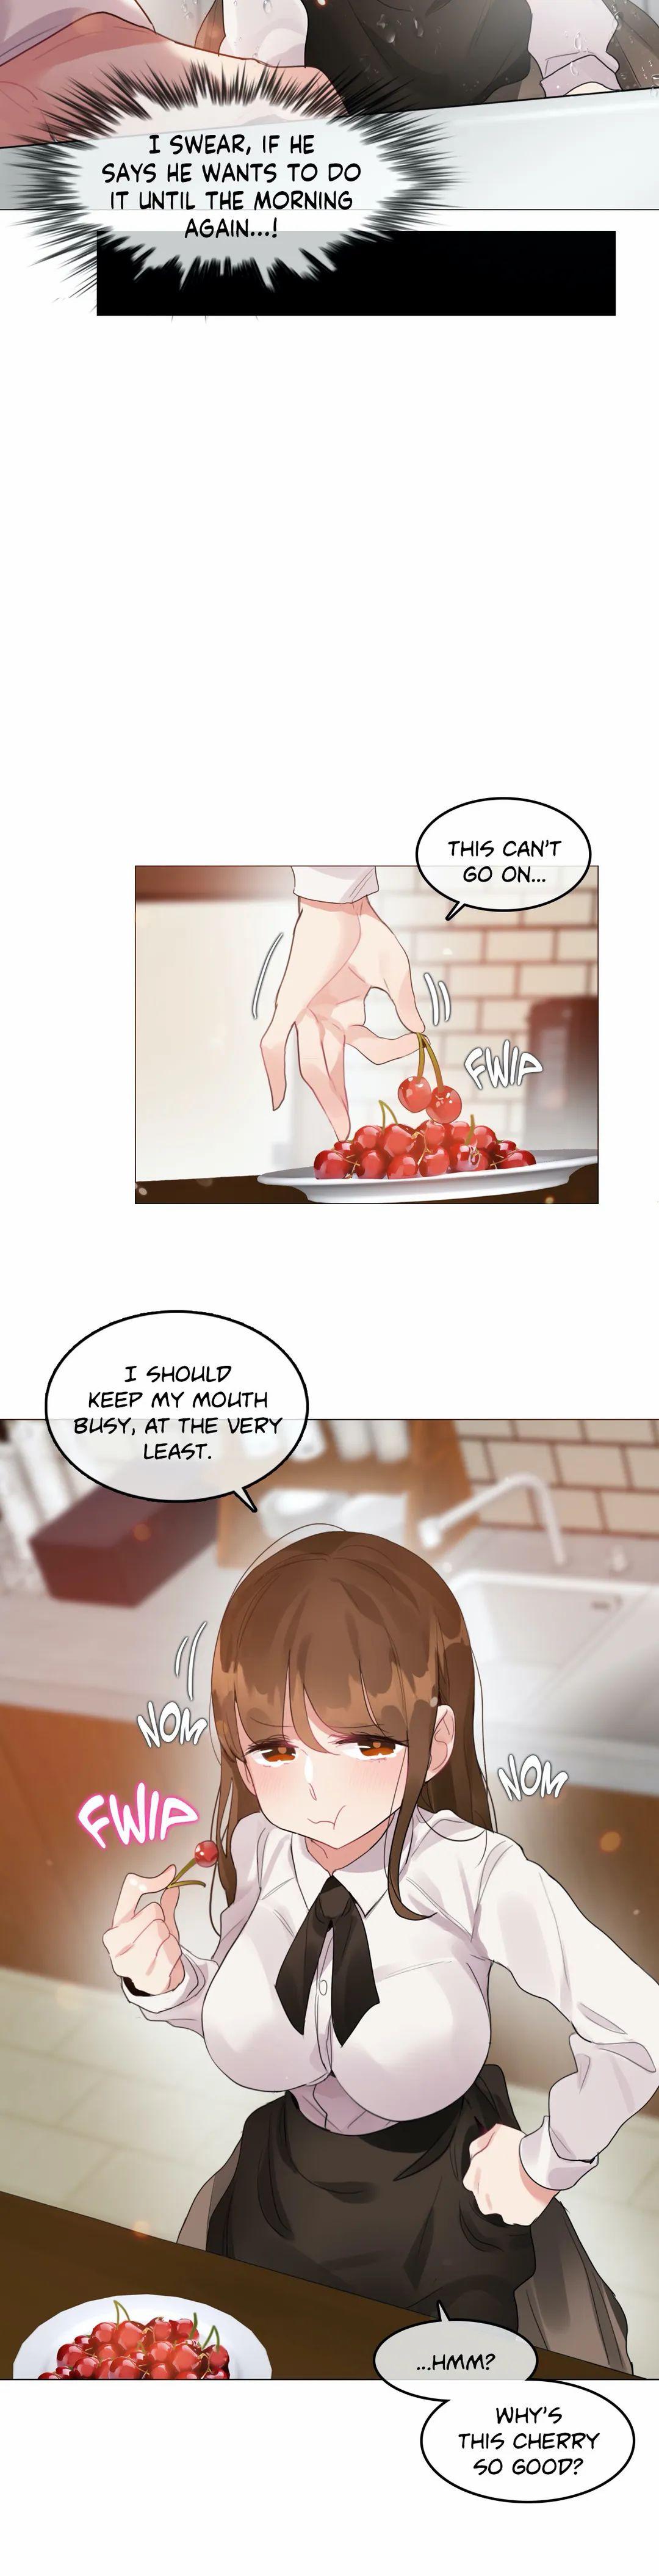 Perverts' Daily Lives Episode 1: Her Secret Recipe Ch1-19 374